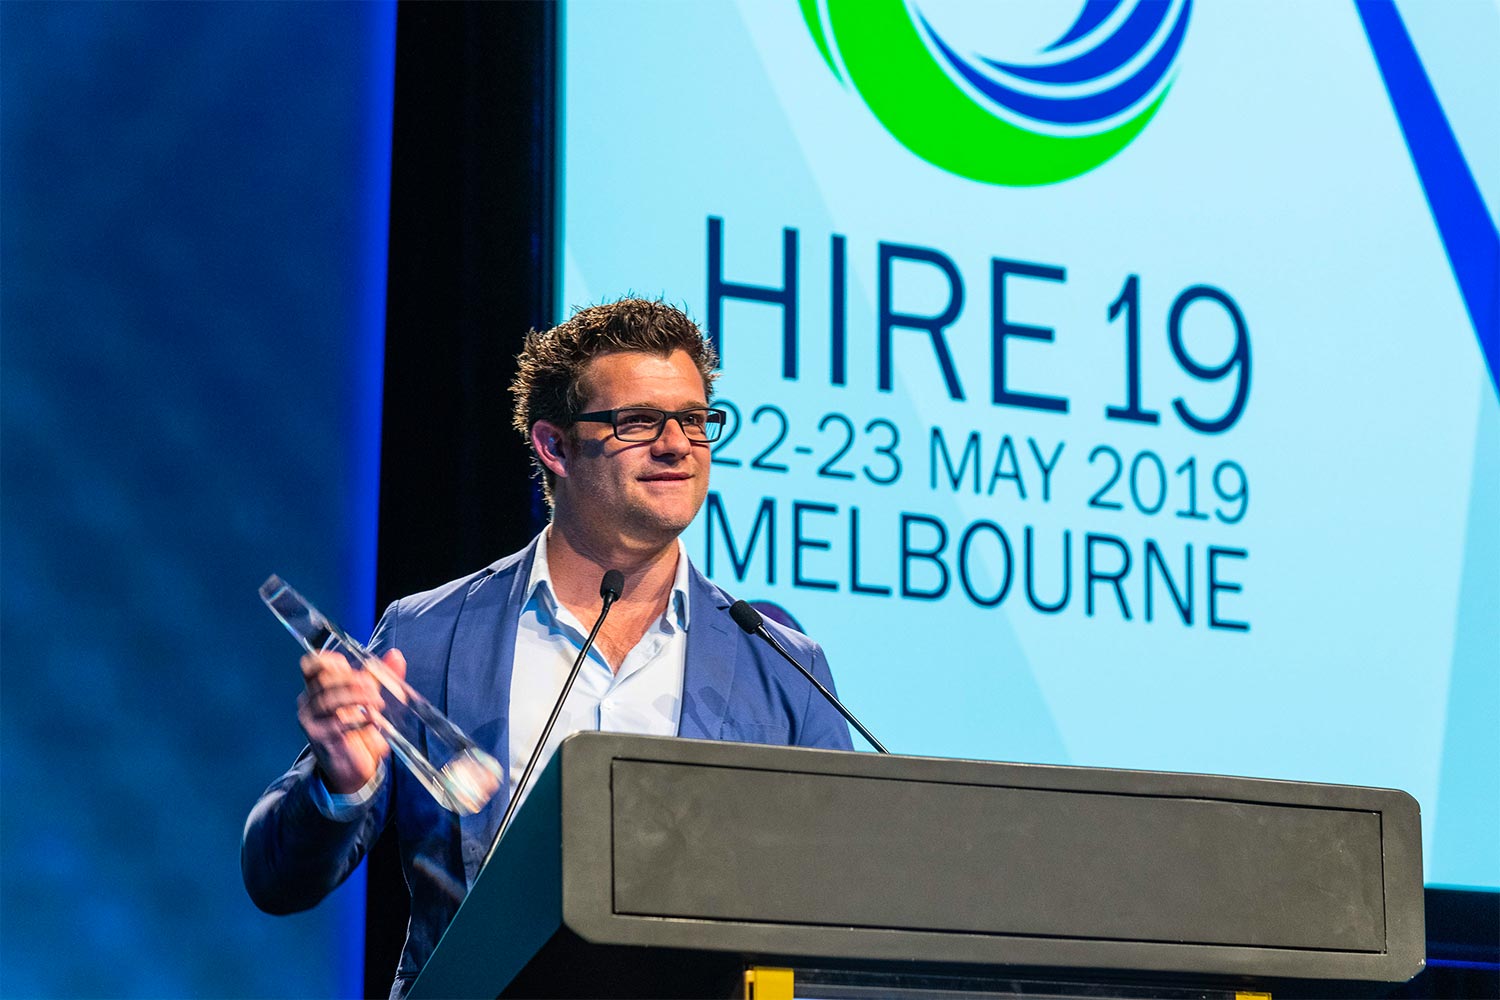 HIRE 19 Awards – Vansite takes out Supplier of the Year